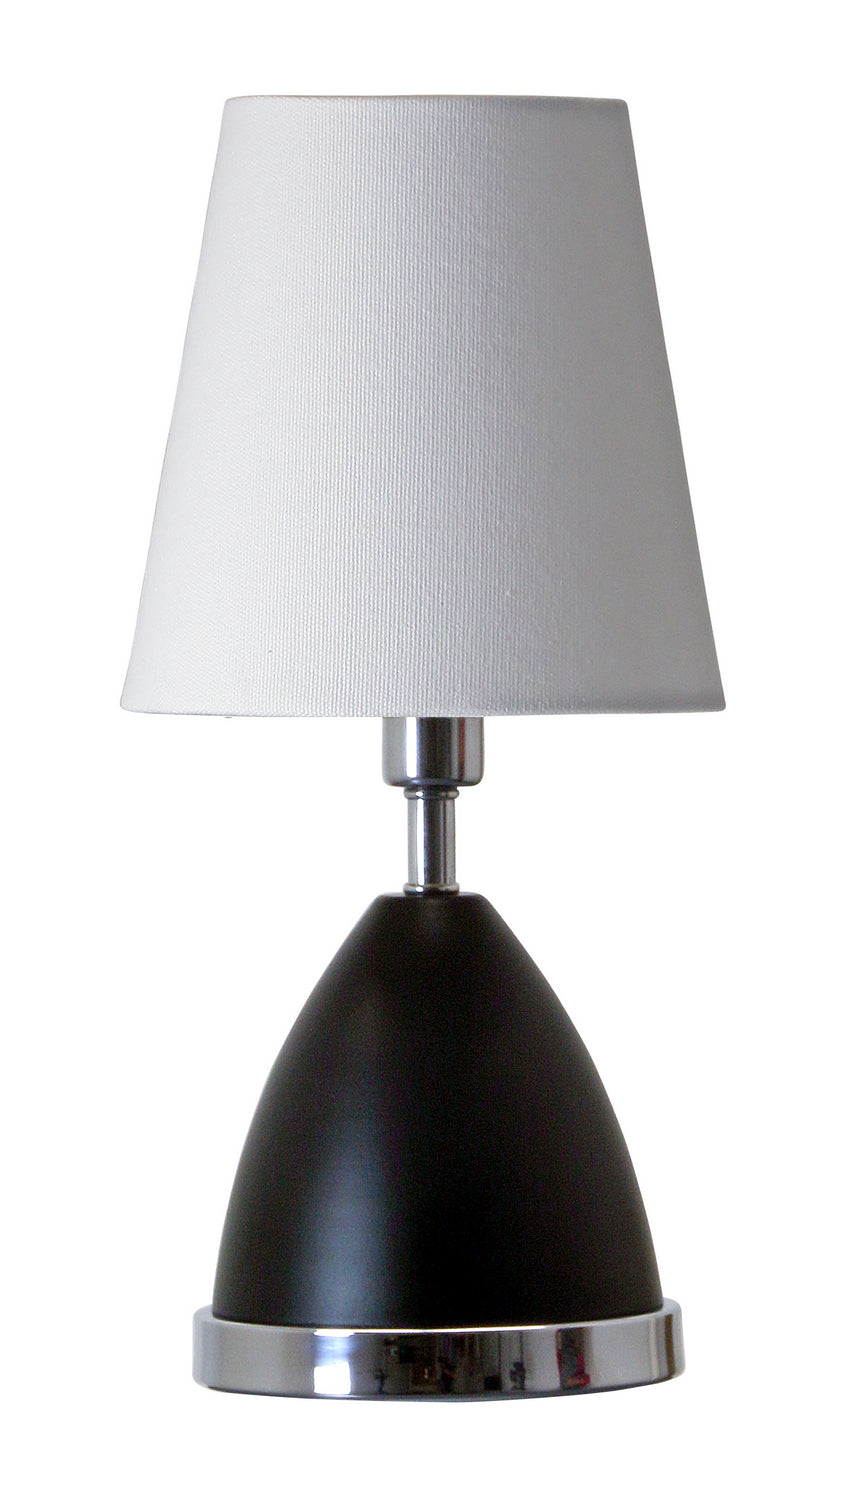 House of Troy - GEO210 - One Light Table Lamp - Geo - Black Matte With Chrome Accents